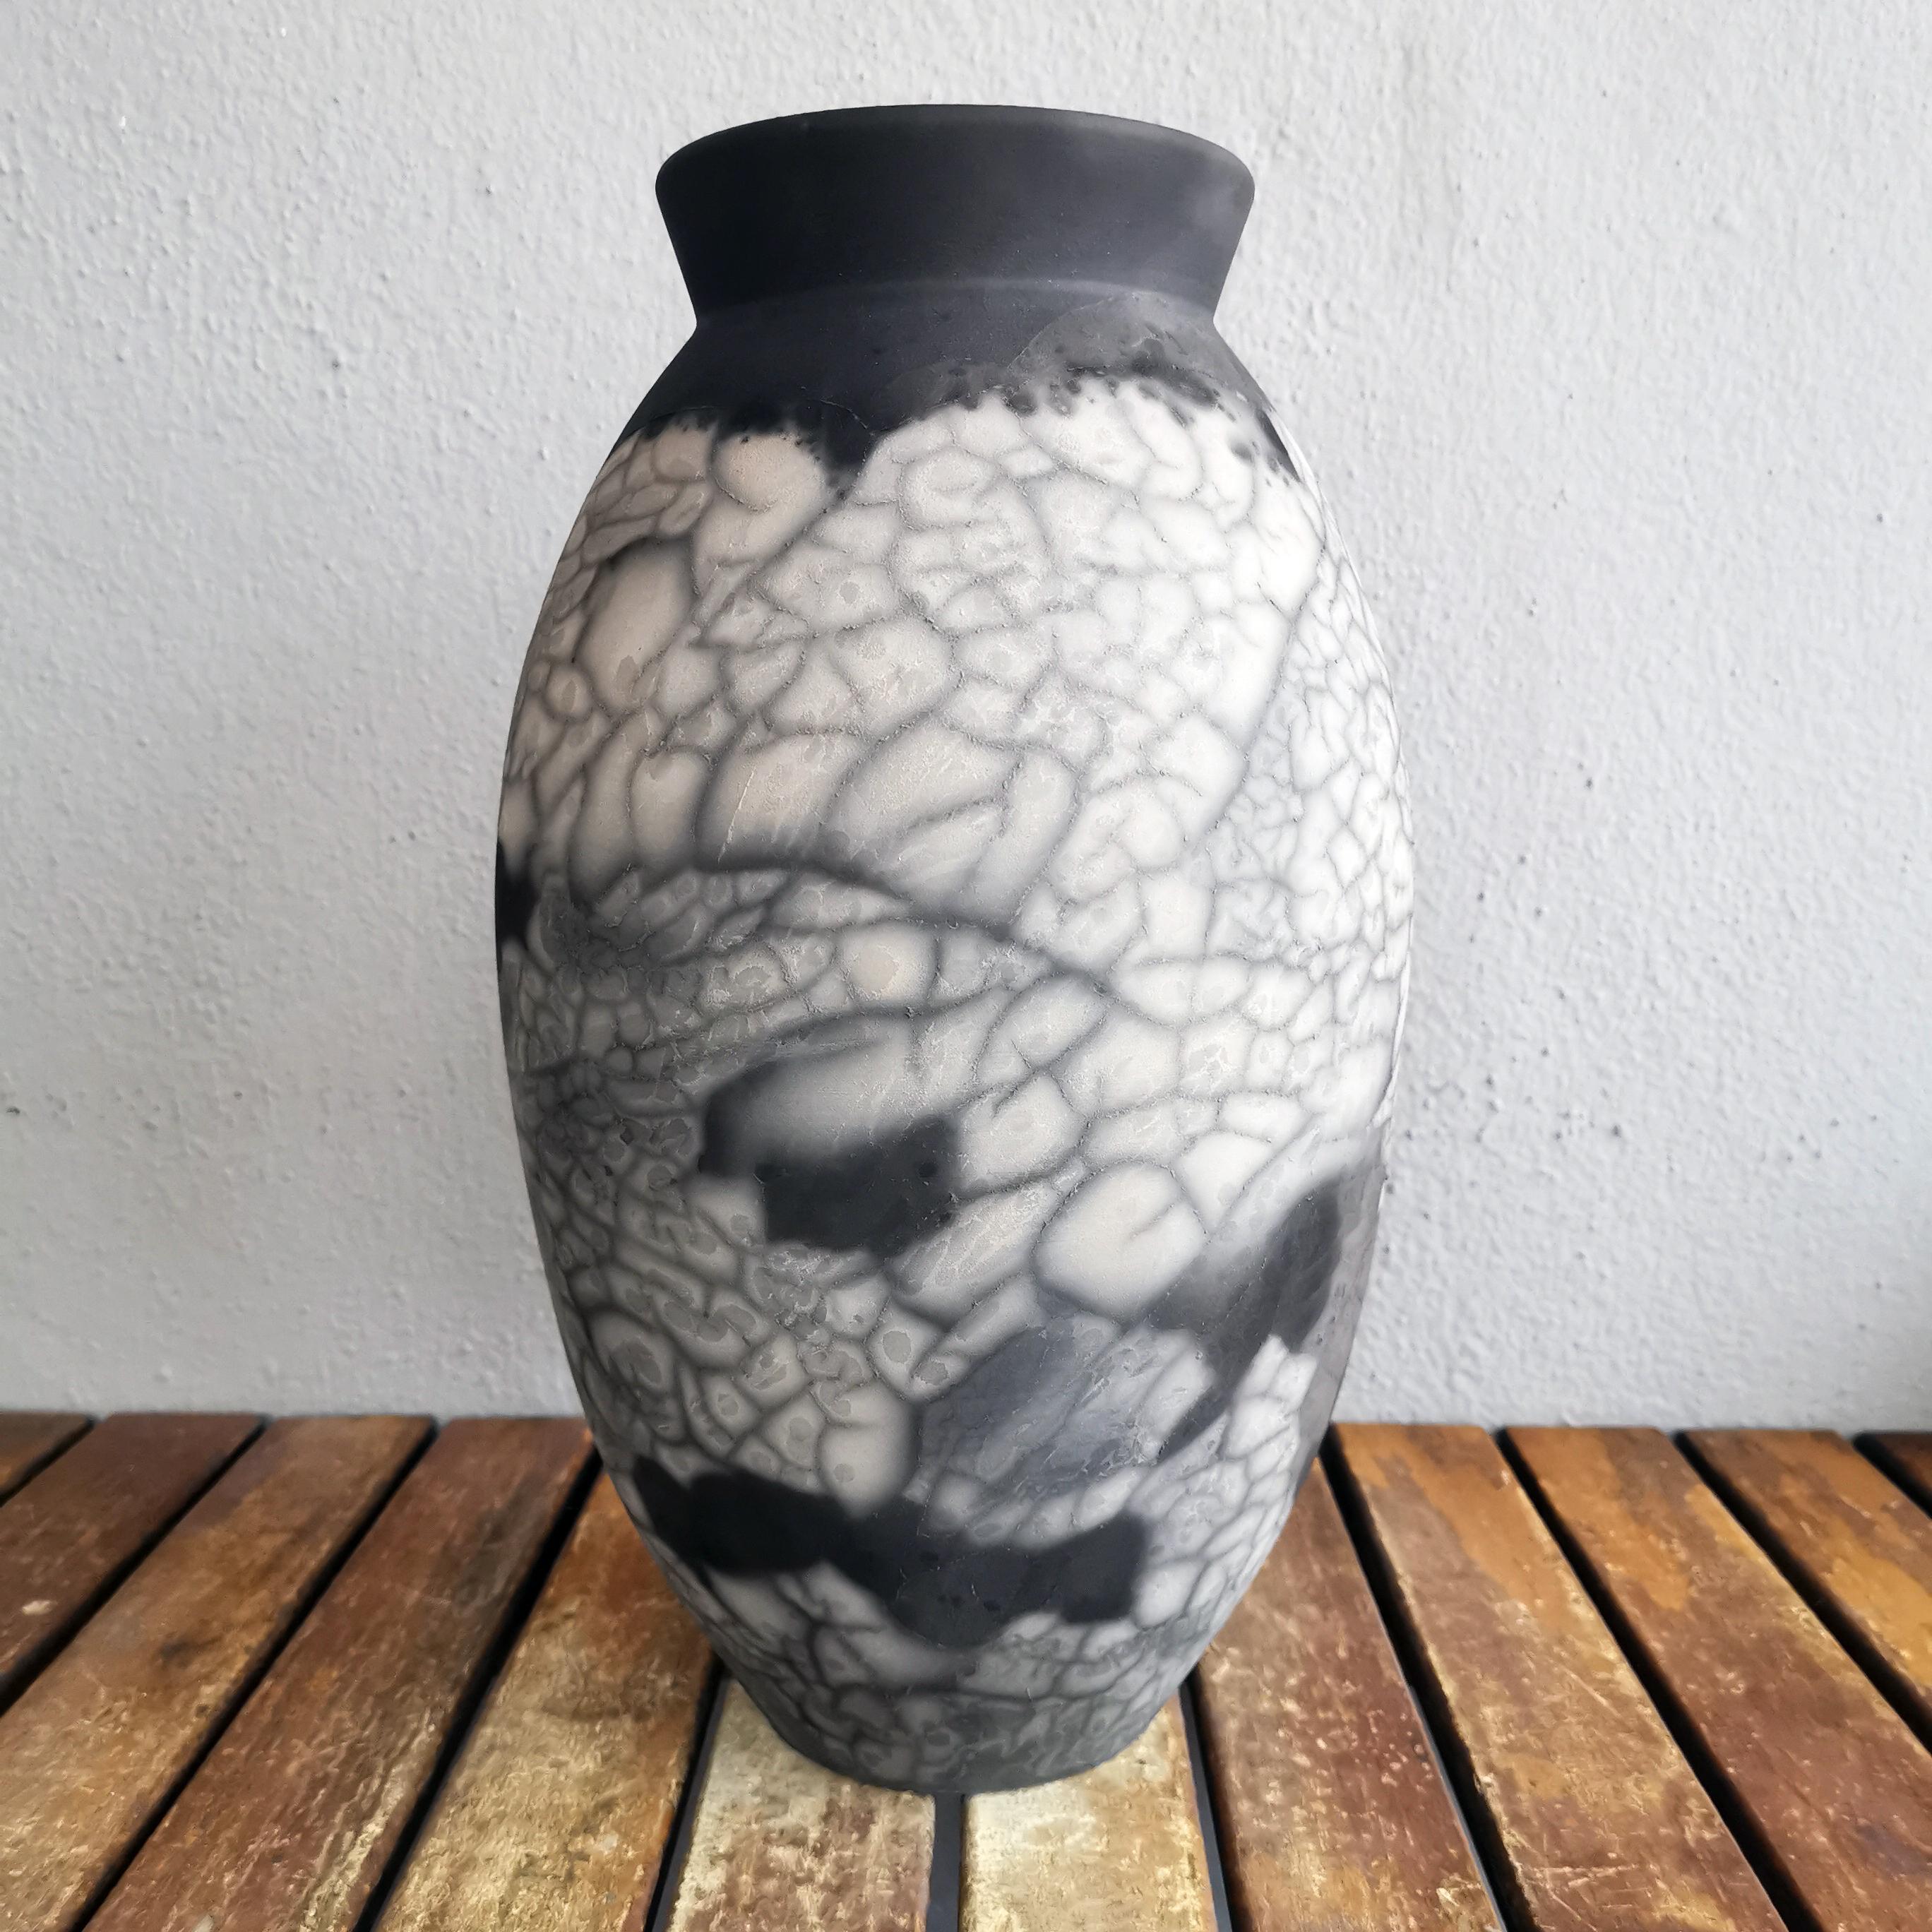 The Oval Vase is a tall, teardrop-shaped design best for adding a touch of elegance and intrigue to an interior space. Made using the Raku technique, it easily becomes a great conversation starter.
Smoked Raku is more commonly known as ‘Naked’ Raku